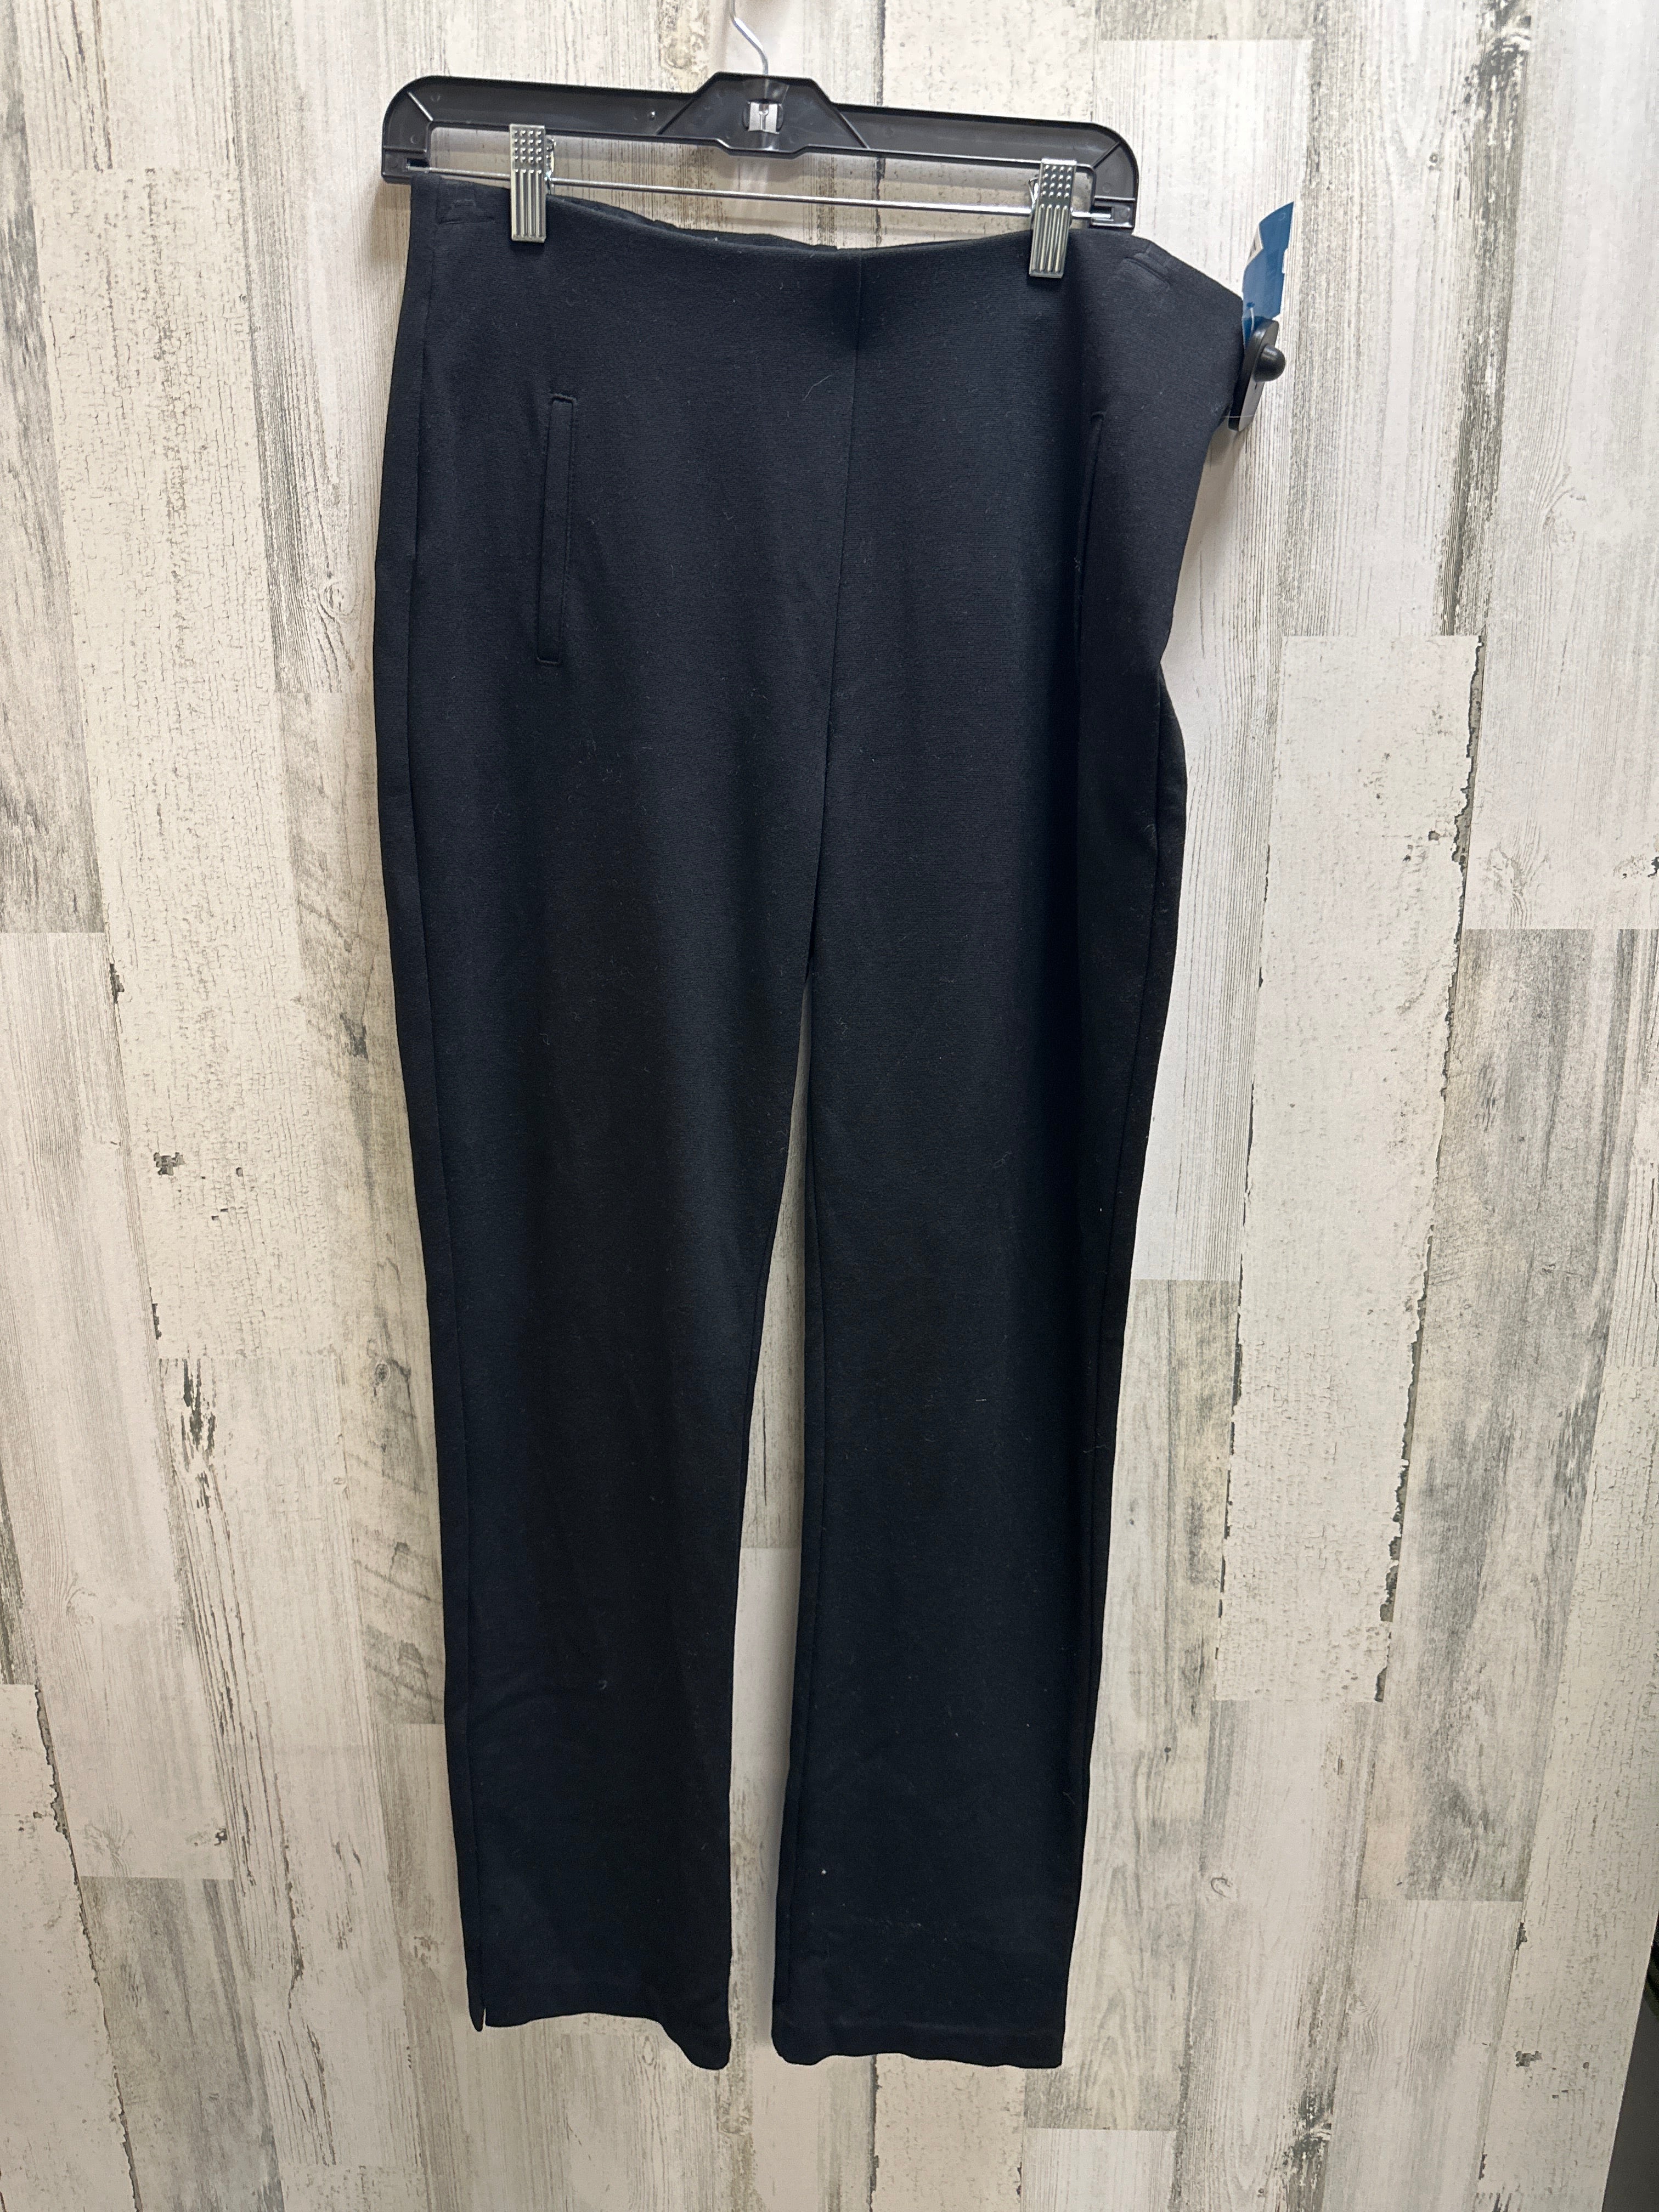 Pants Work/dress By Chicos Size: 10